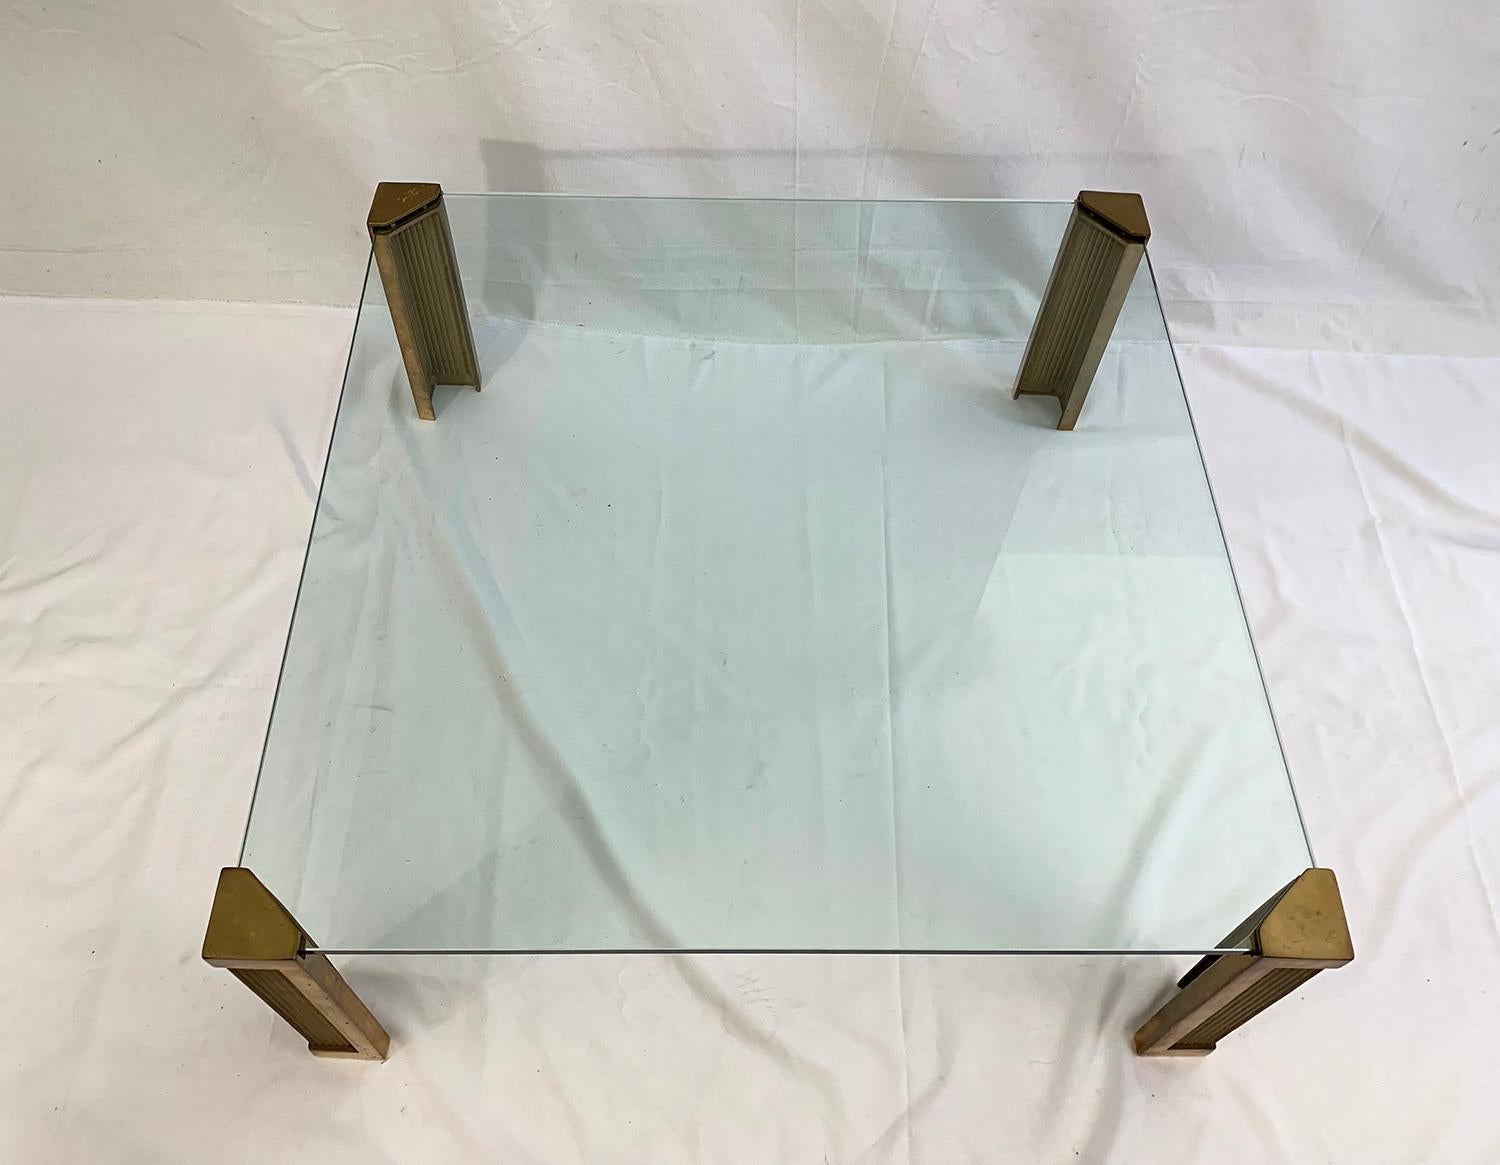 Coffee table or side table, model T14, Peter Ghyczy, Netherlands, 1970s.

This sculptural table is made of a thick glass top held by four heavy brass feet molded into the sand. The legs of the T14 table have a smooth outline and fluted panels with a